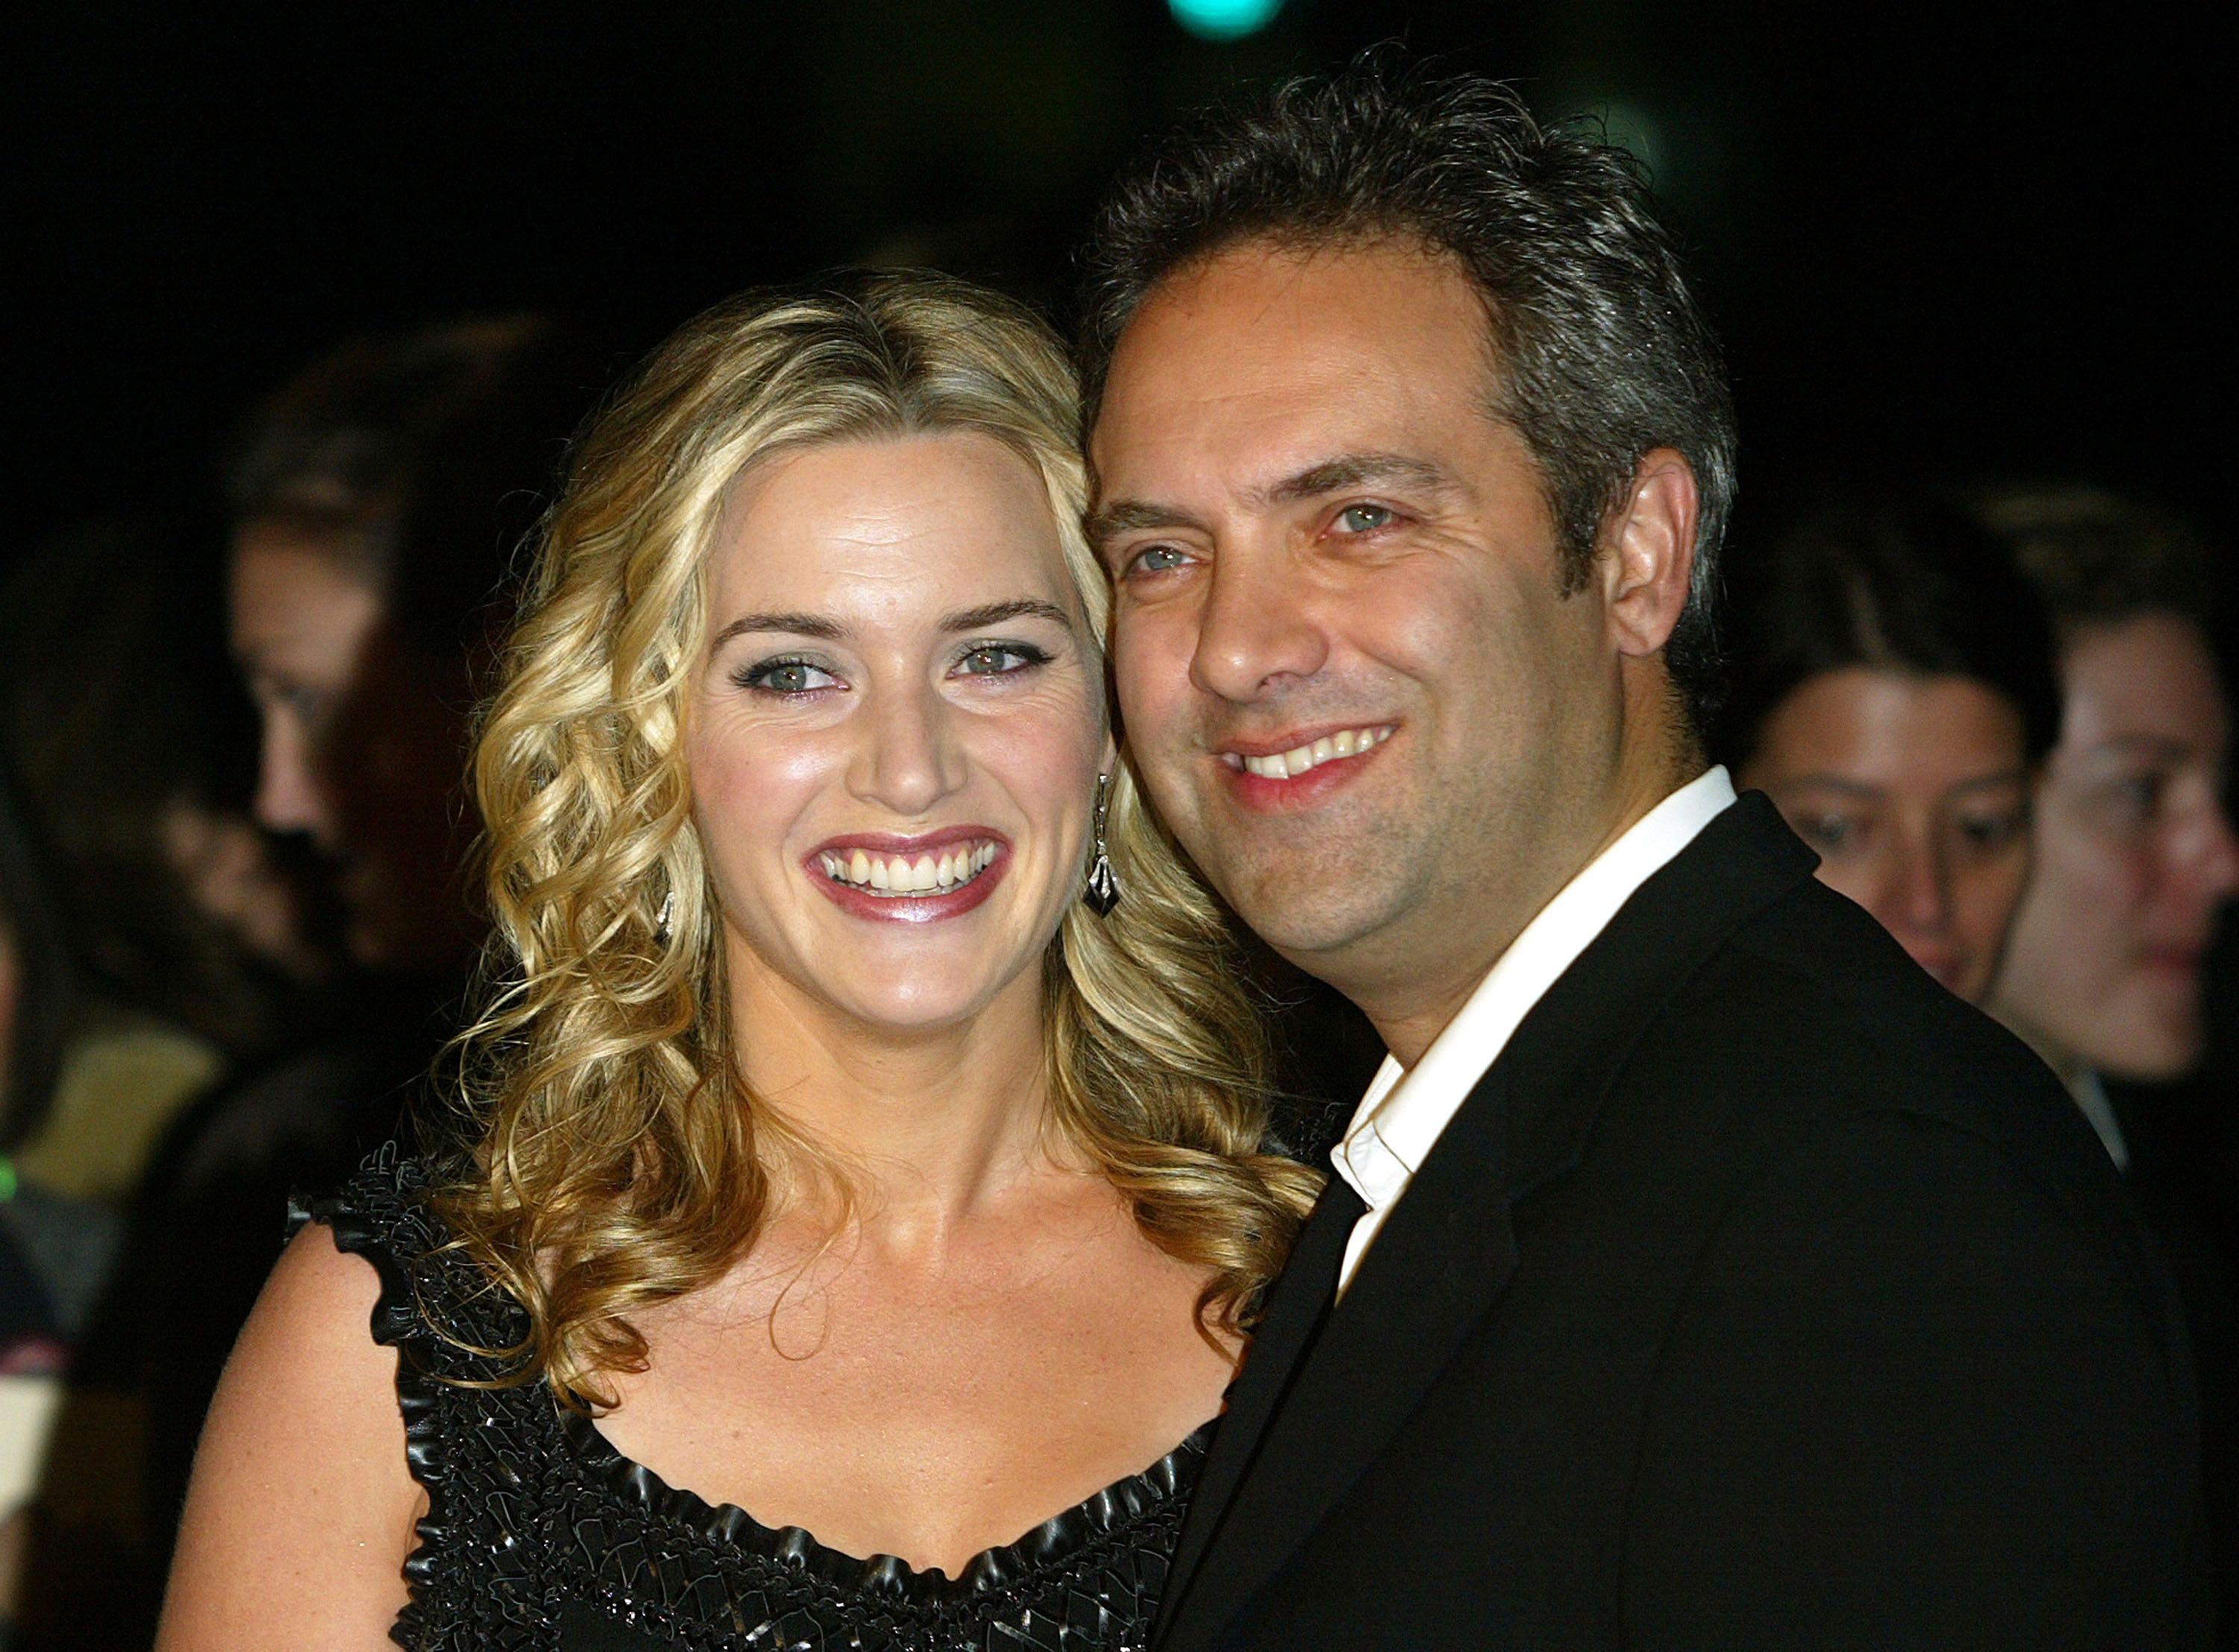  Kate Winslet and director Sam Mendes at the premiere of "Finding Neverland" in 2004 in Beverly Hills | Source: Getty Images